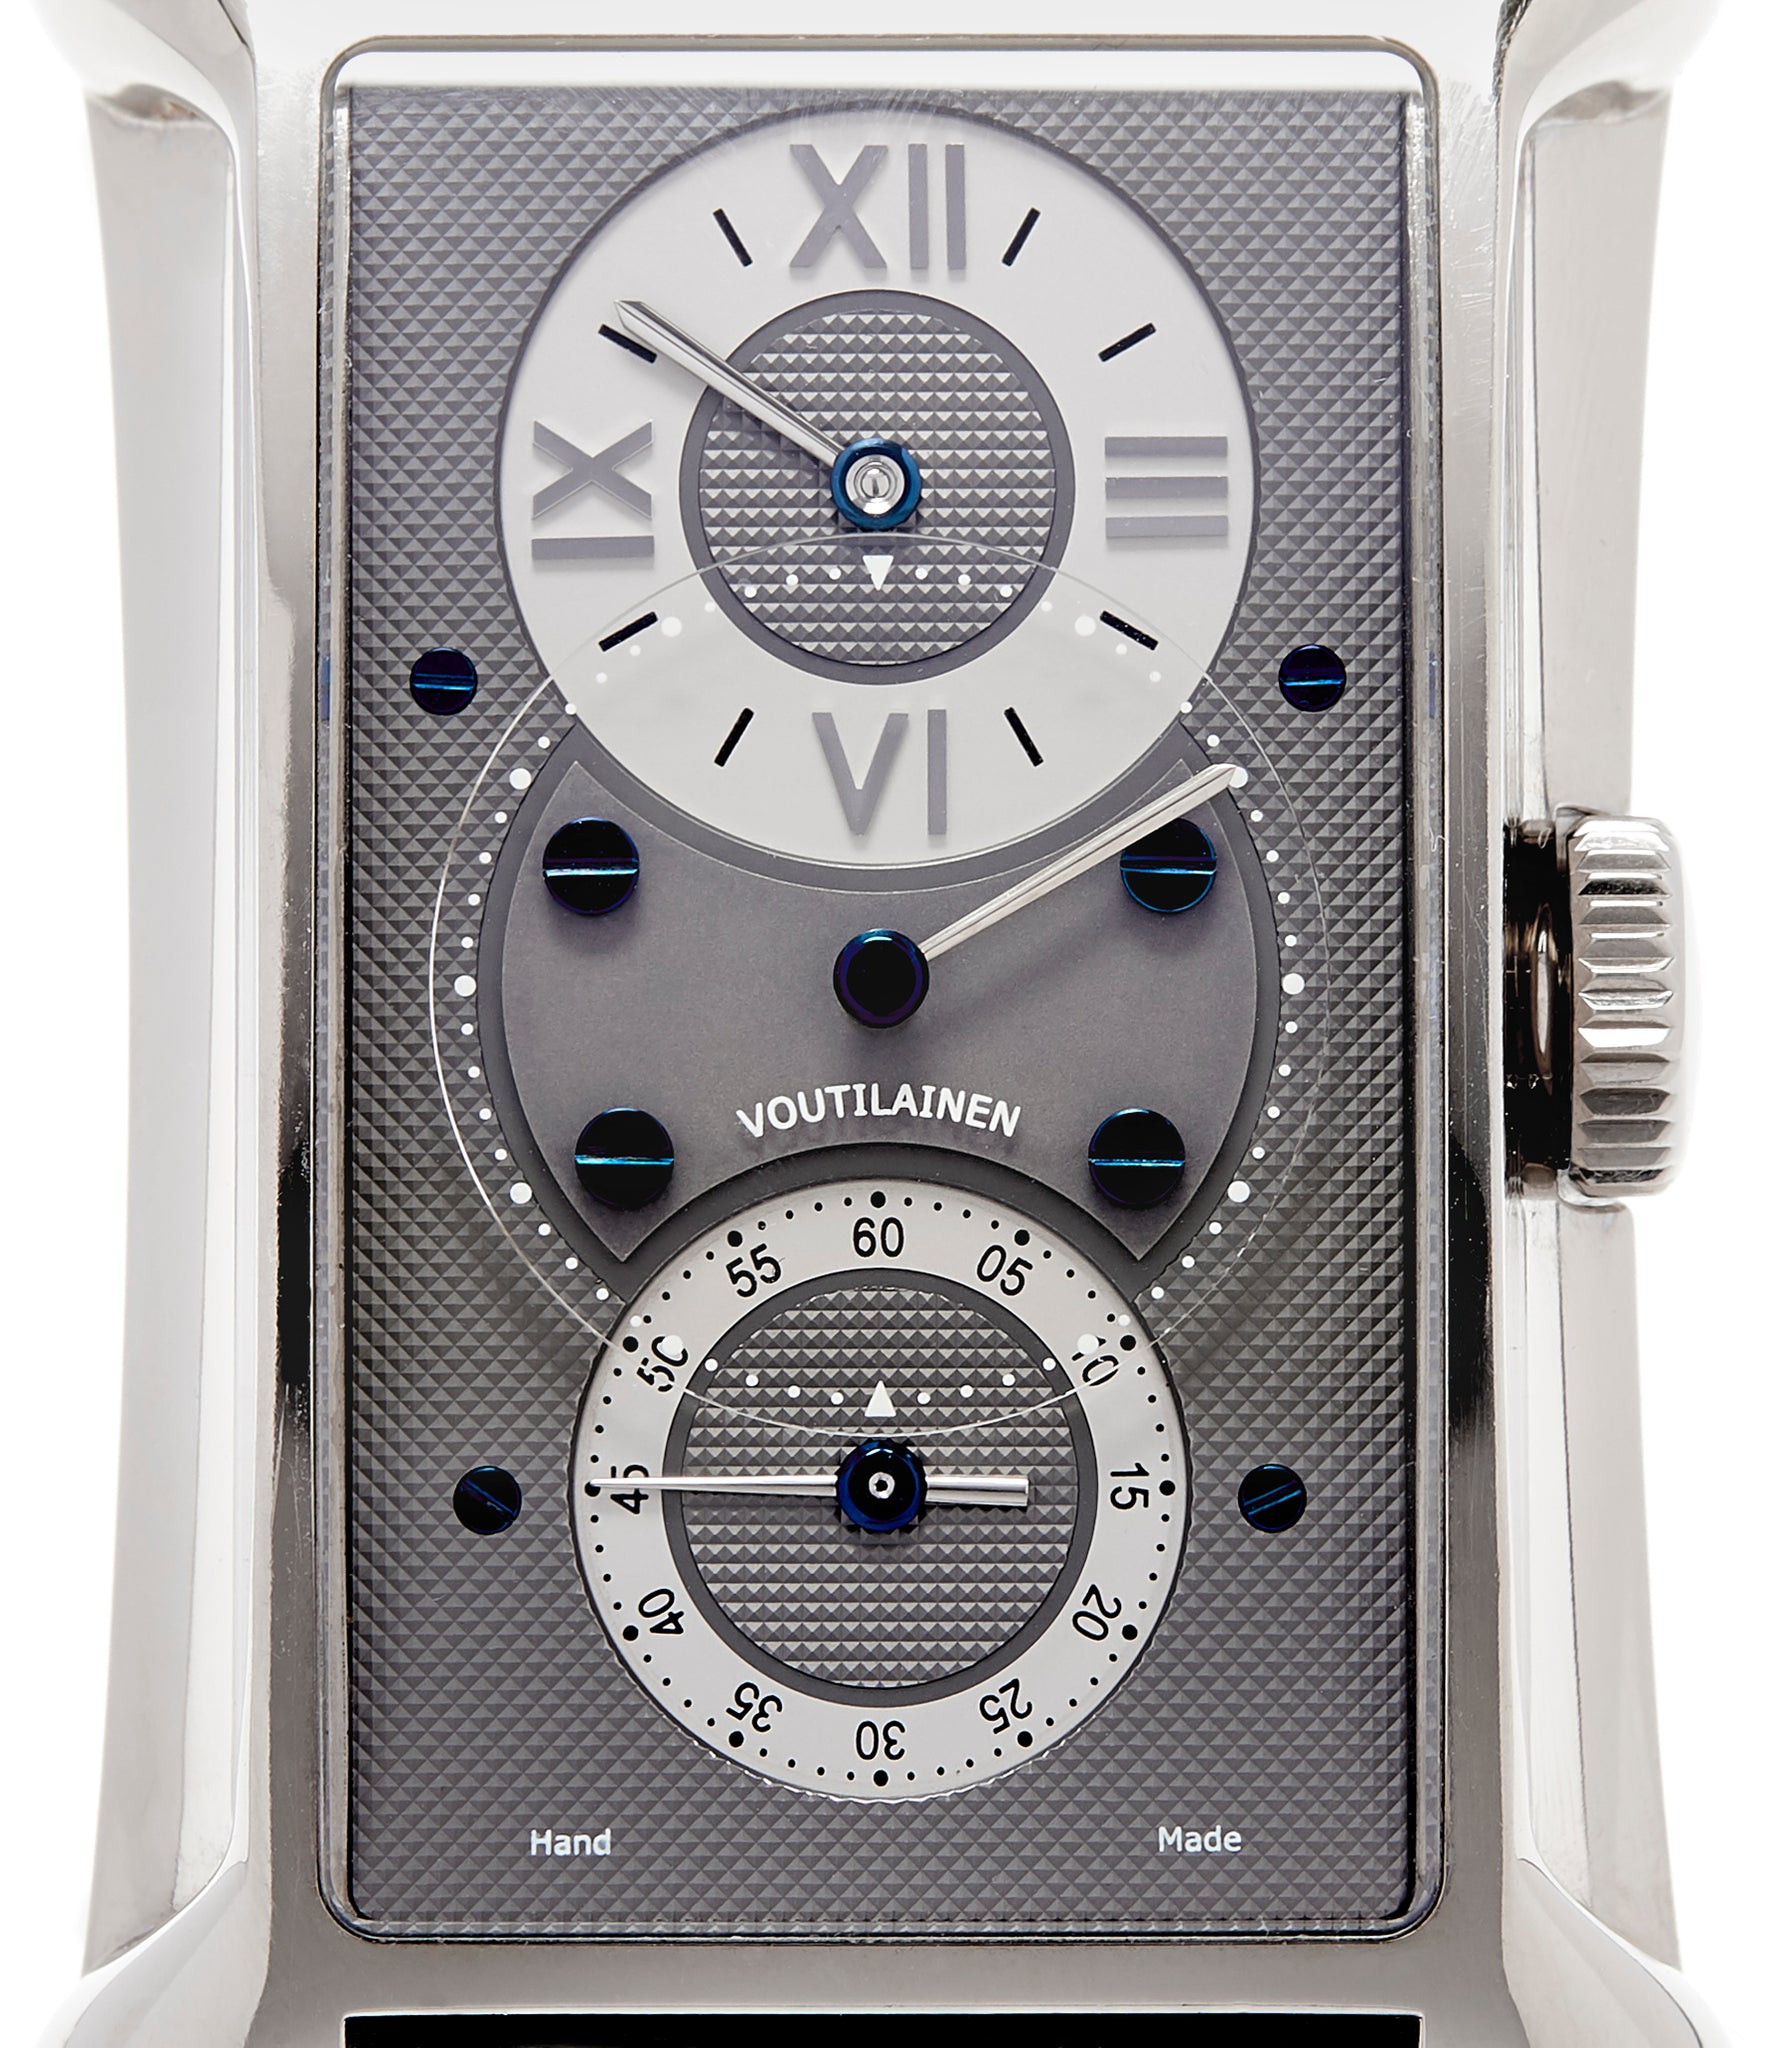 grey dial Voutilainen 27 Chronometre white gold Limited Edition white gold watch by Kari Voutilainen for sale online at approved re-seller A Collected Man London UK specialist of rare watches